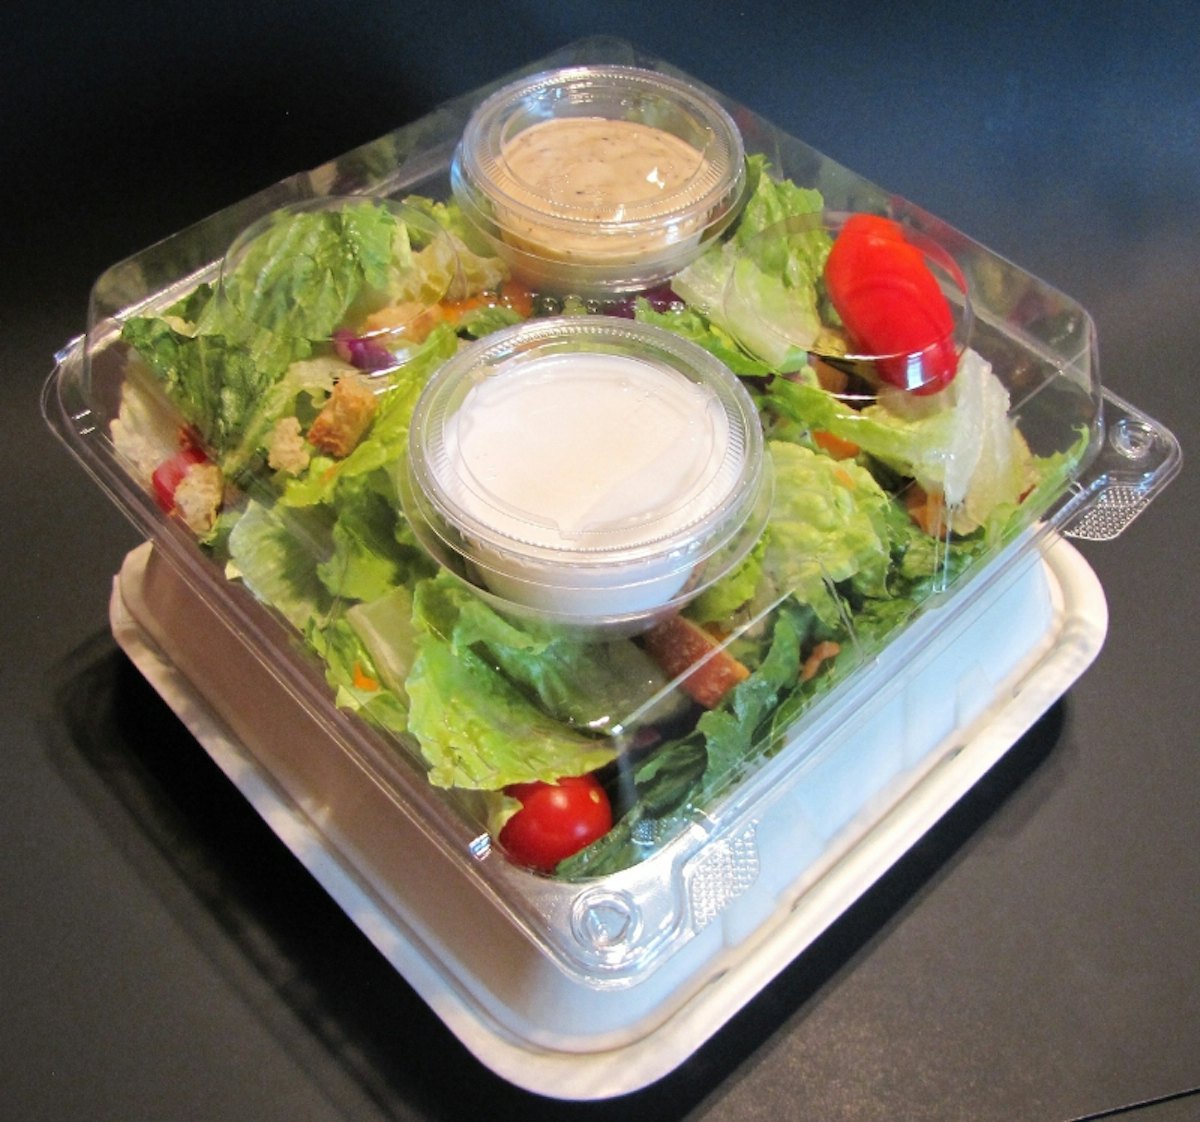 Go To Containers Hygienic Takeout Food Trays Packaging World